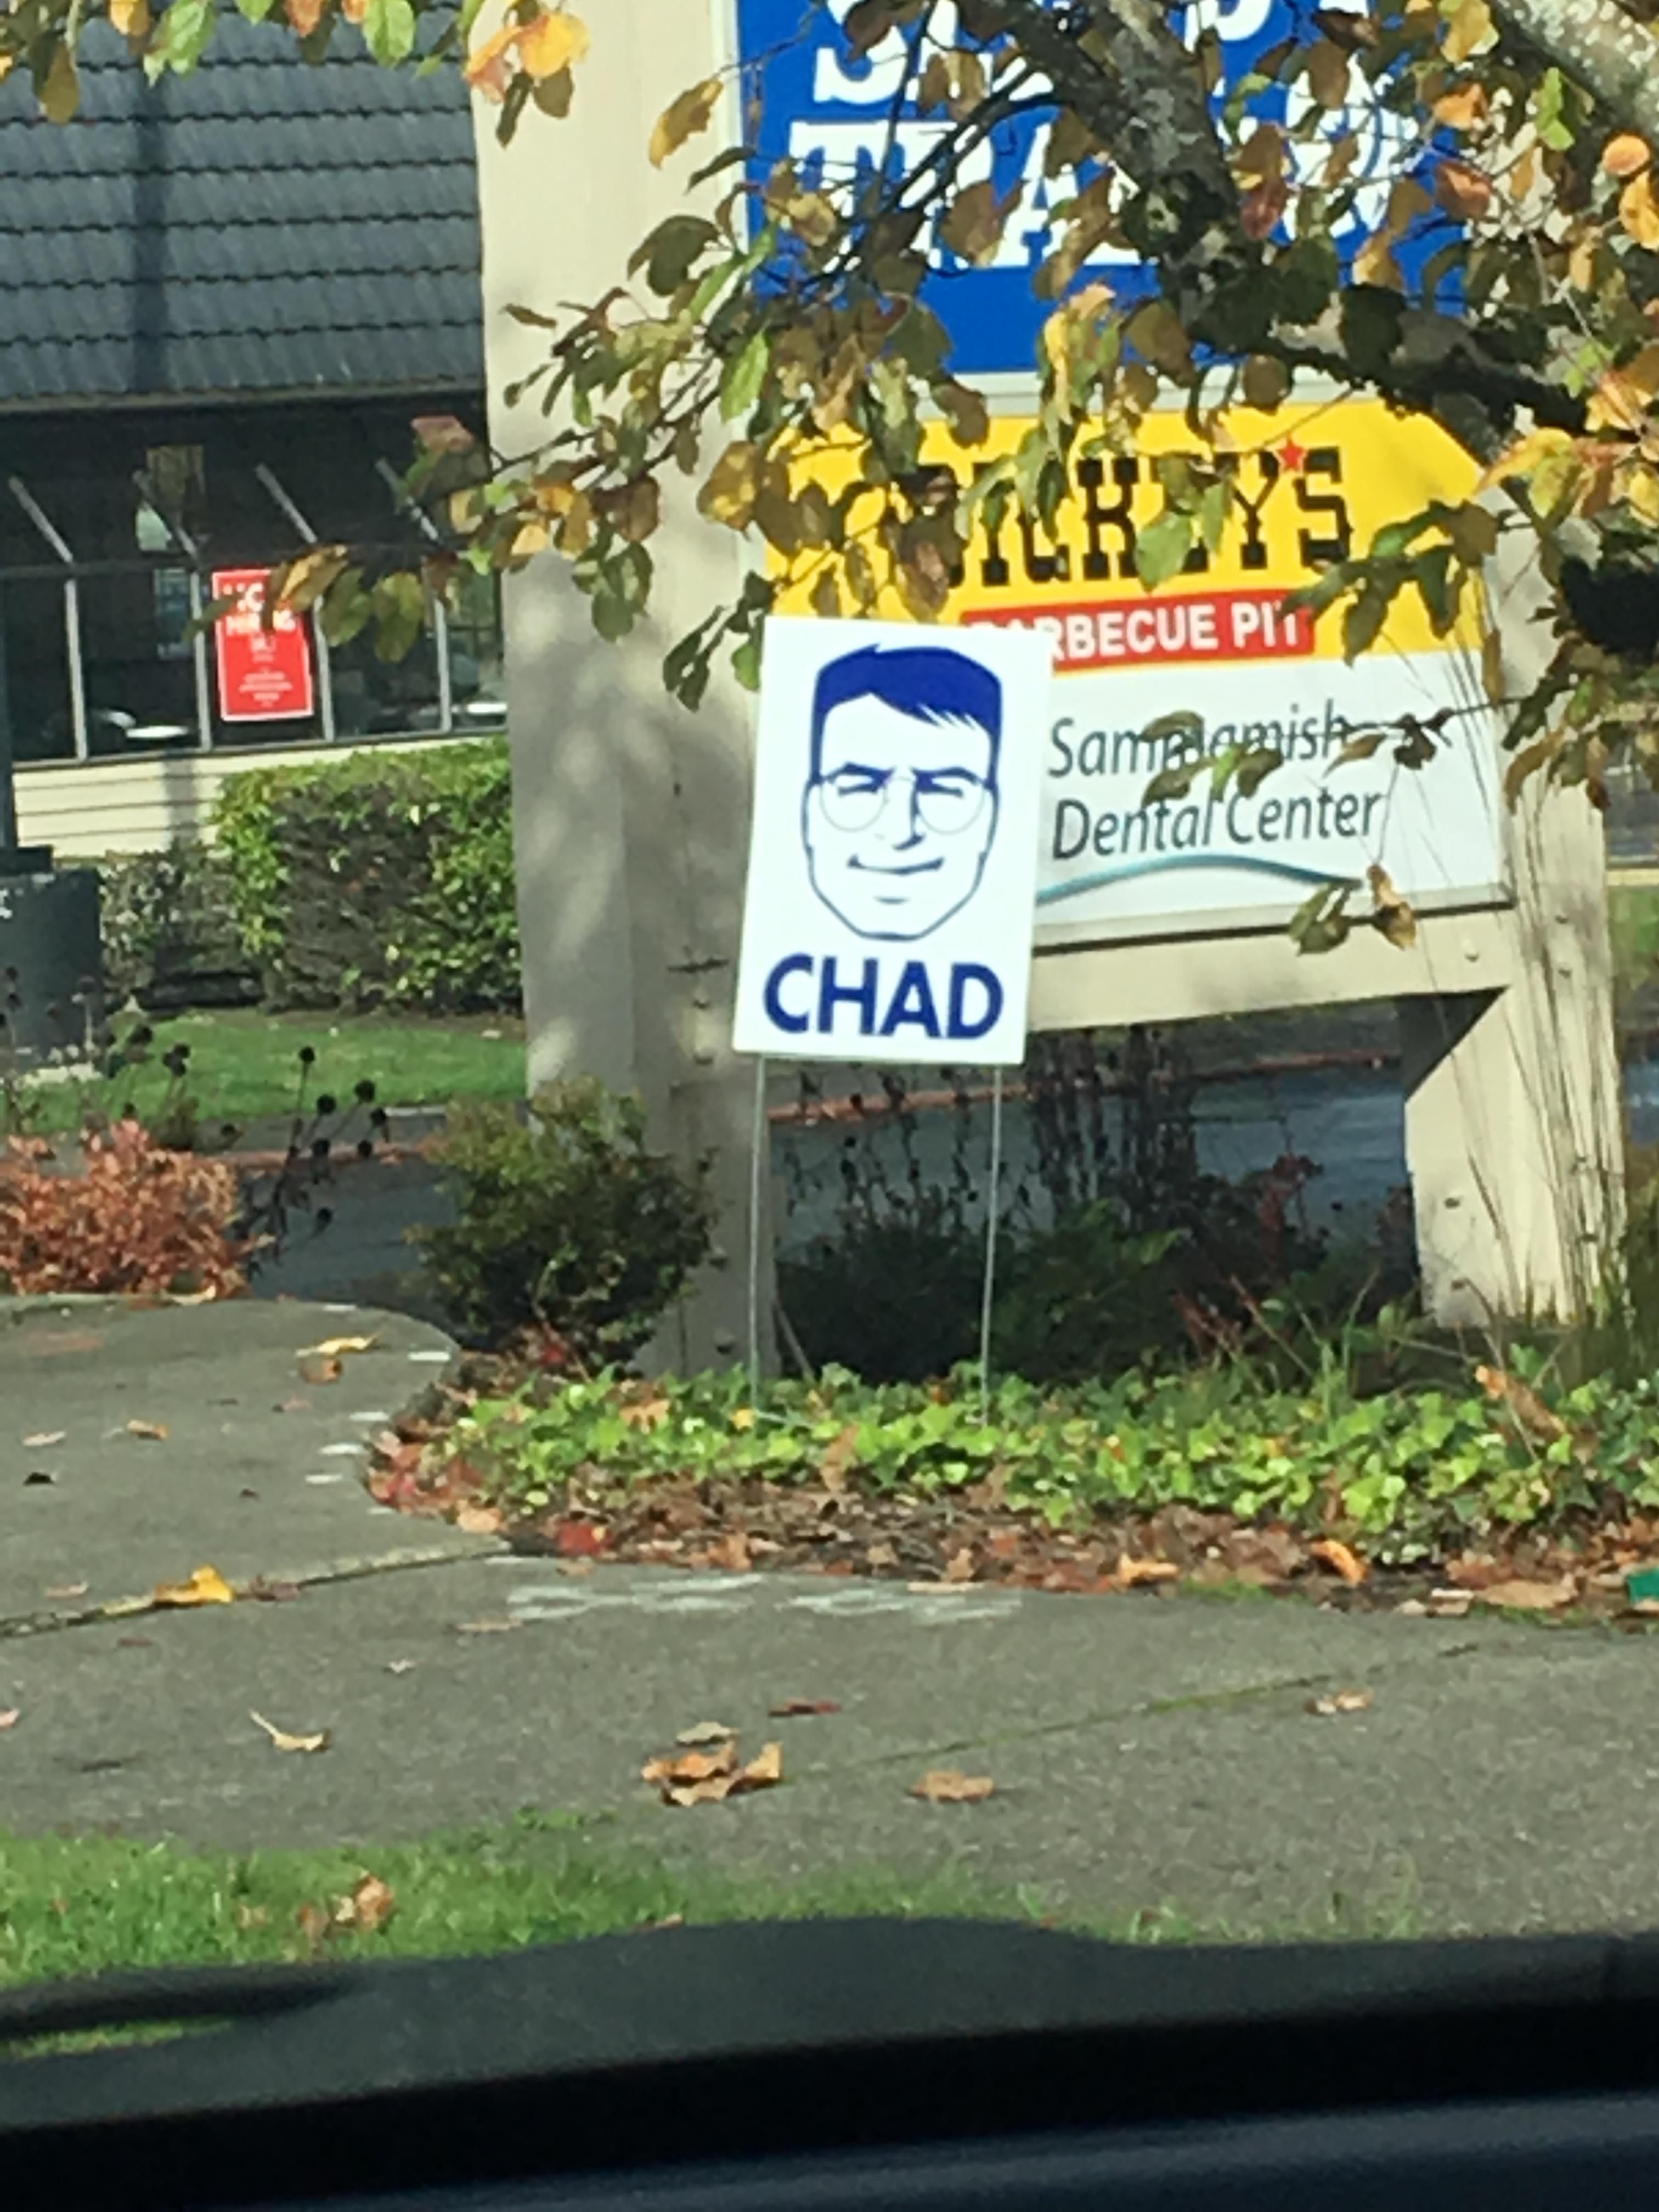 I have no idea what Chad is trying to achieve, but I support him 100%